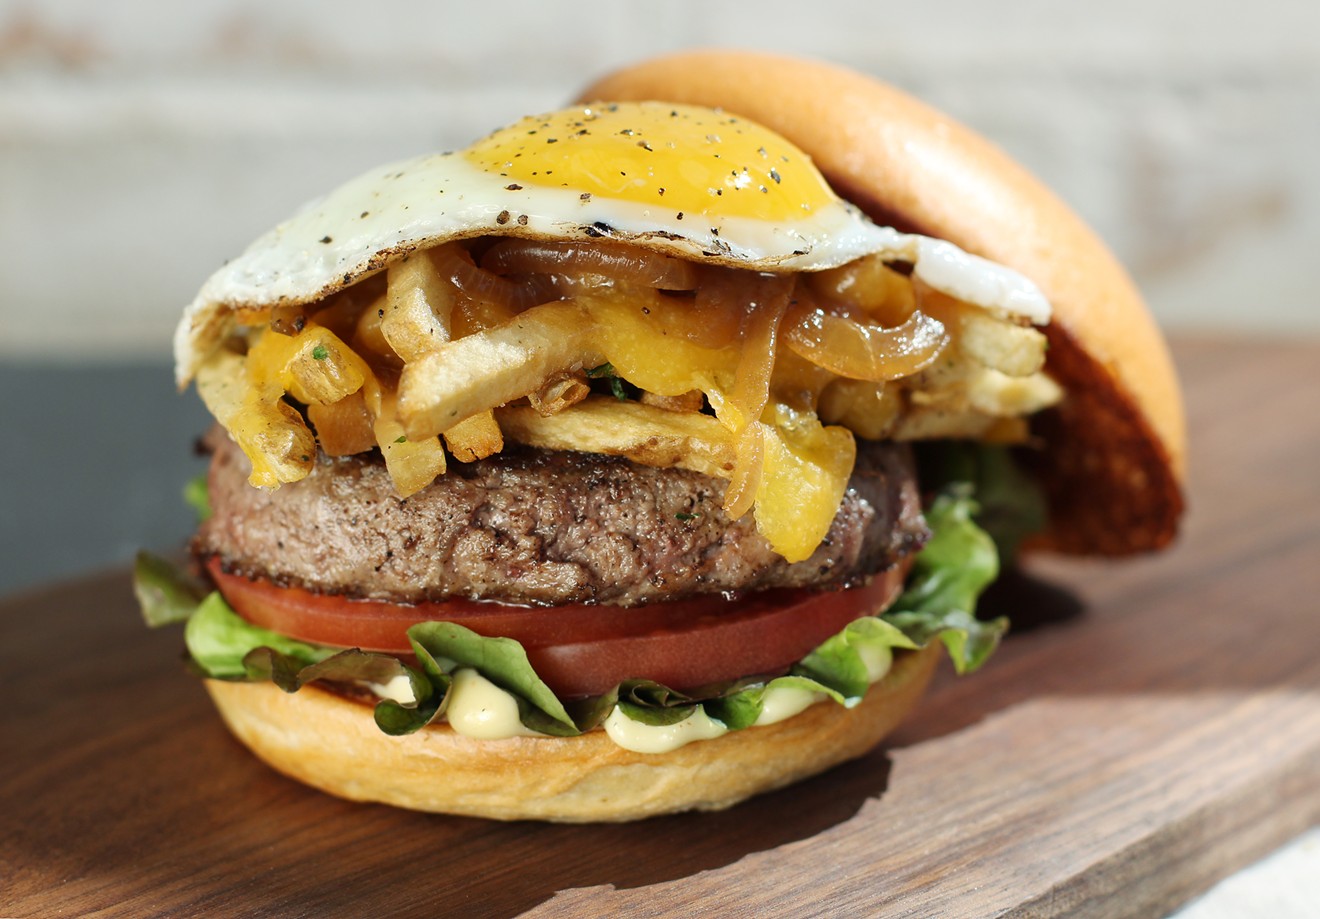 You won't want to miss this limited-time Poutine Burger.